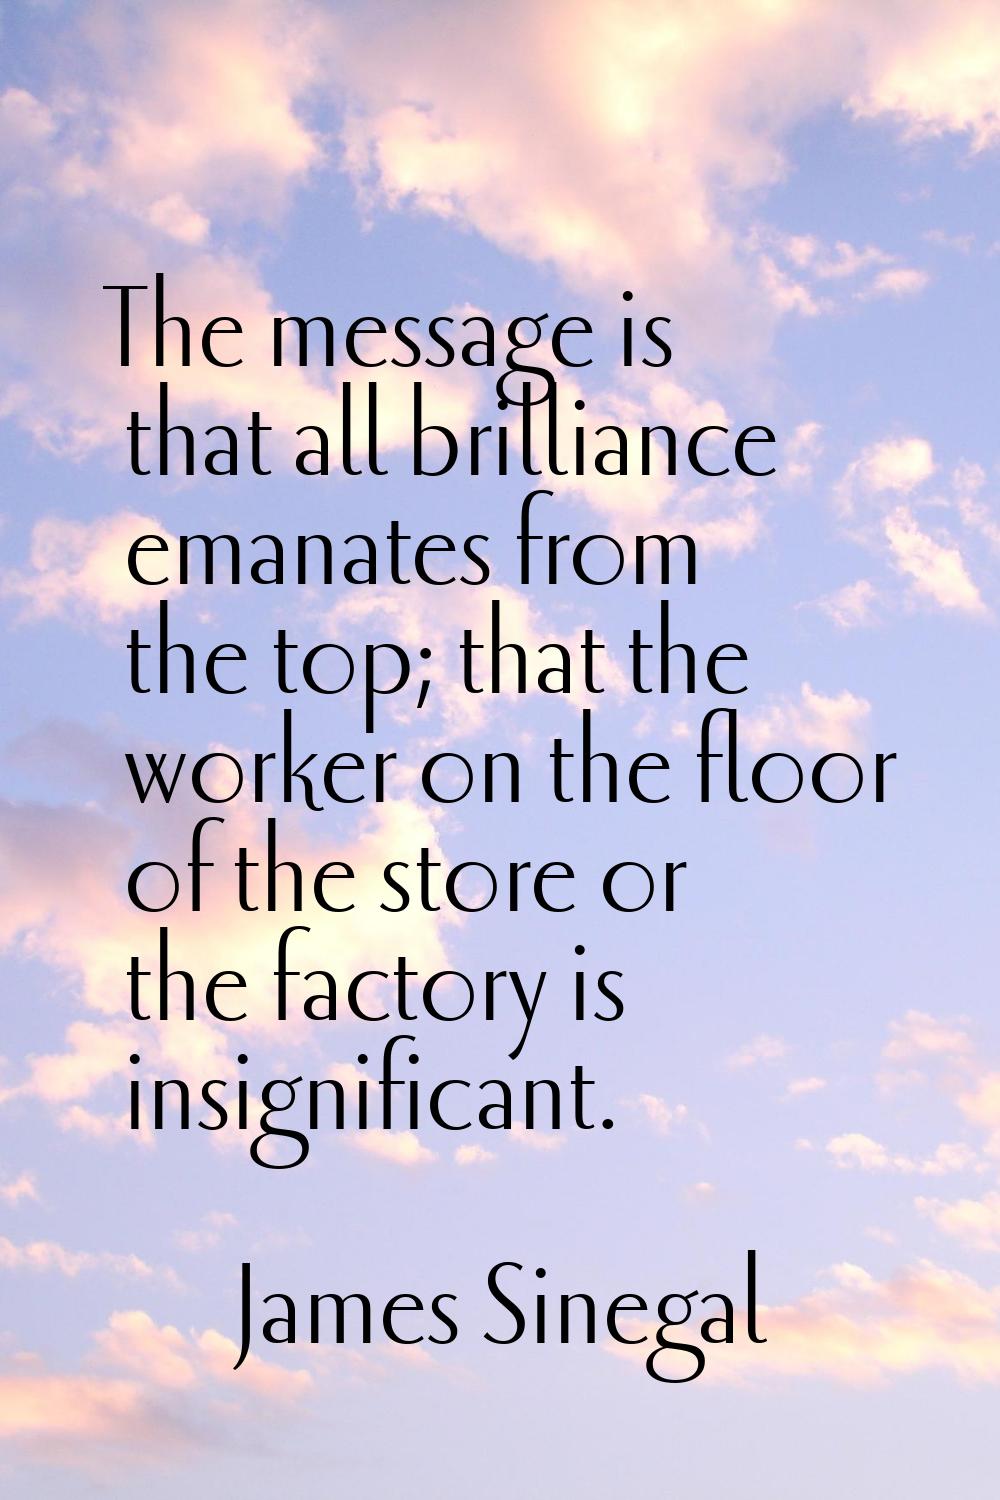 The message is that all brilliance emanates from the top; that the worker on the floor of the store